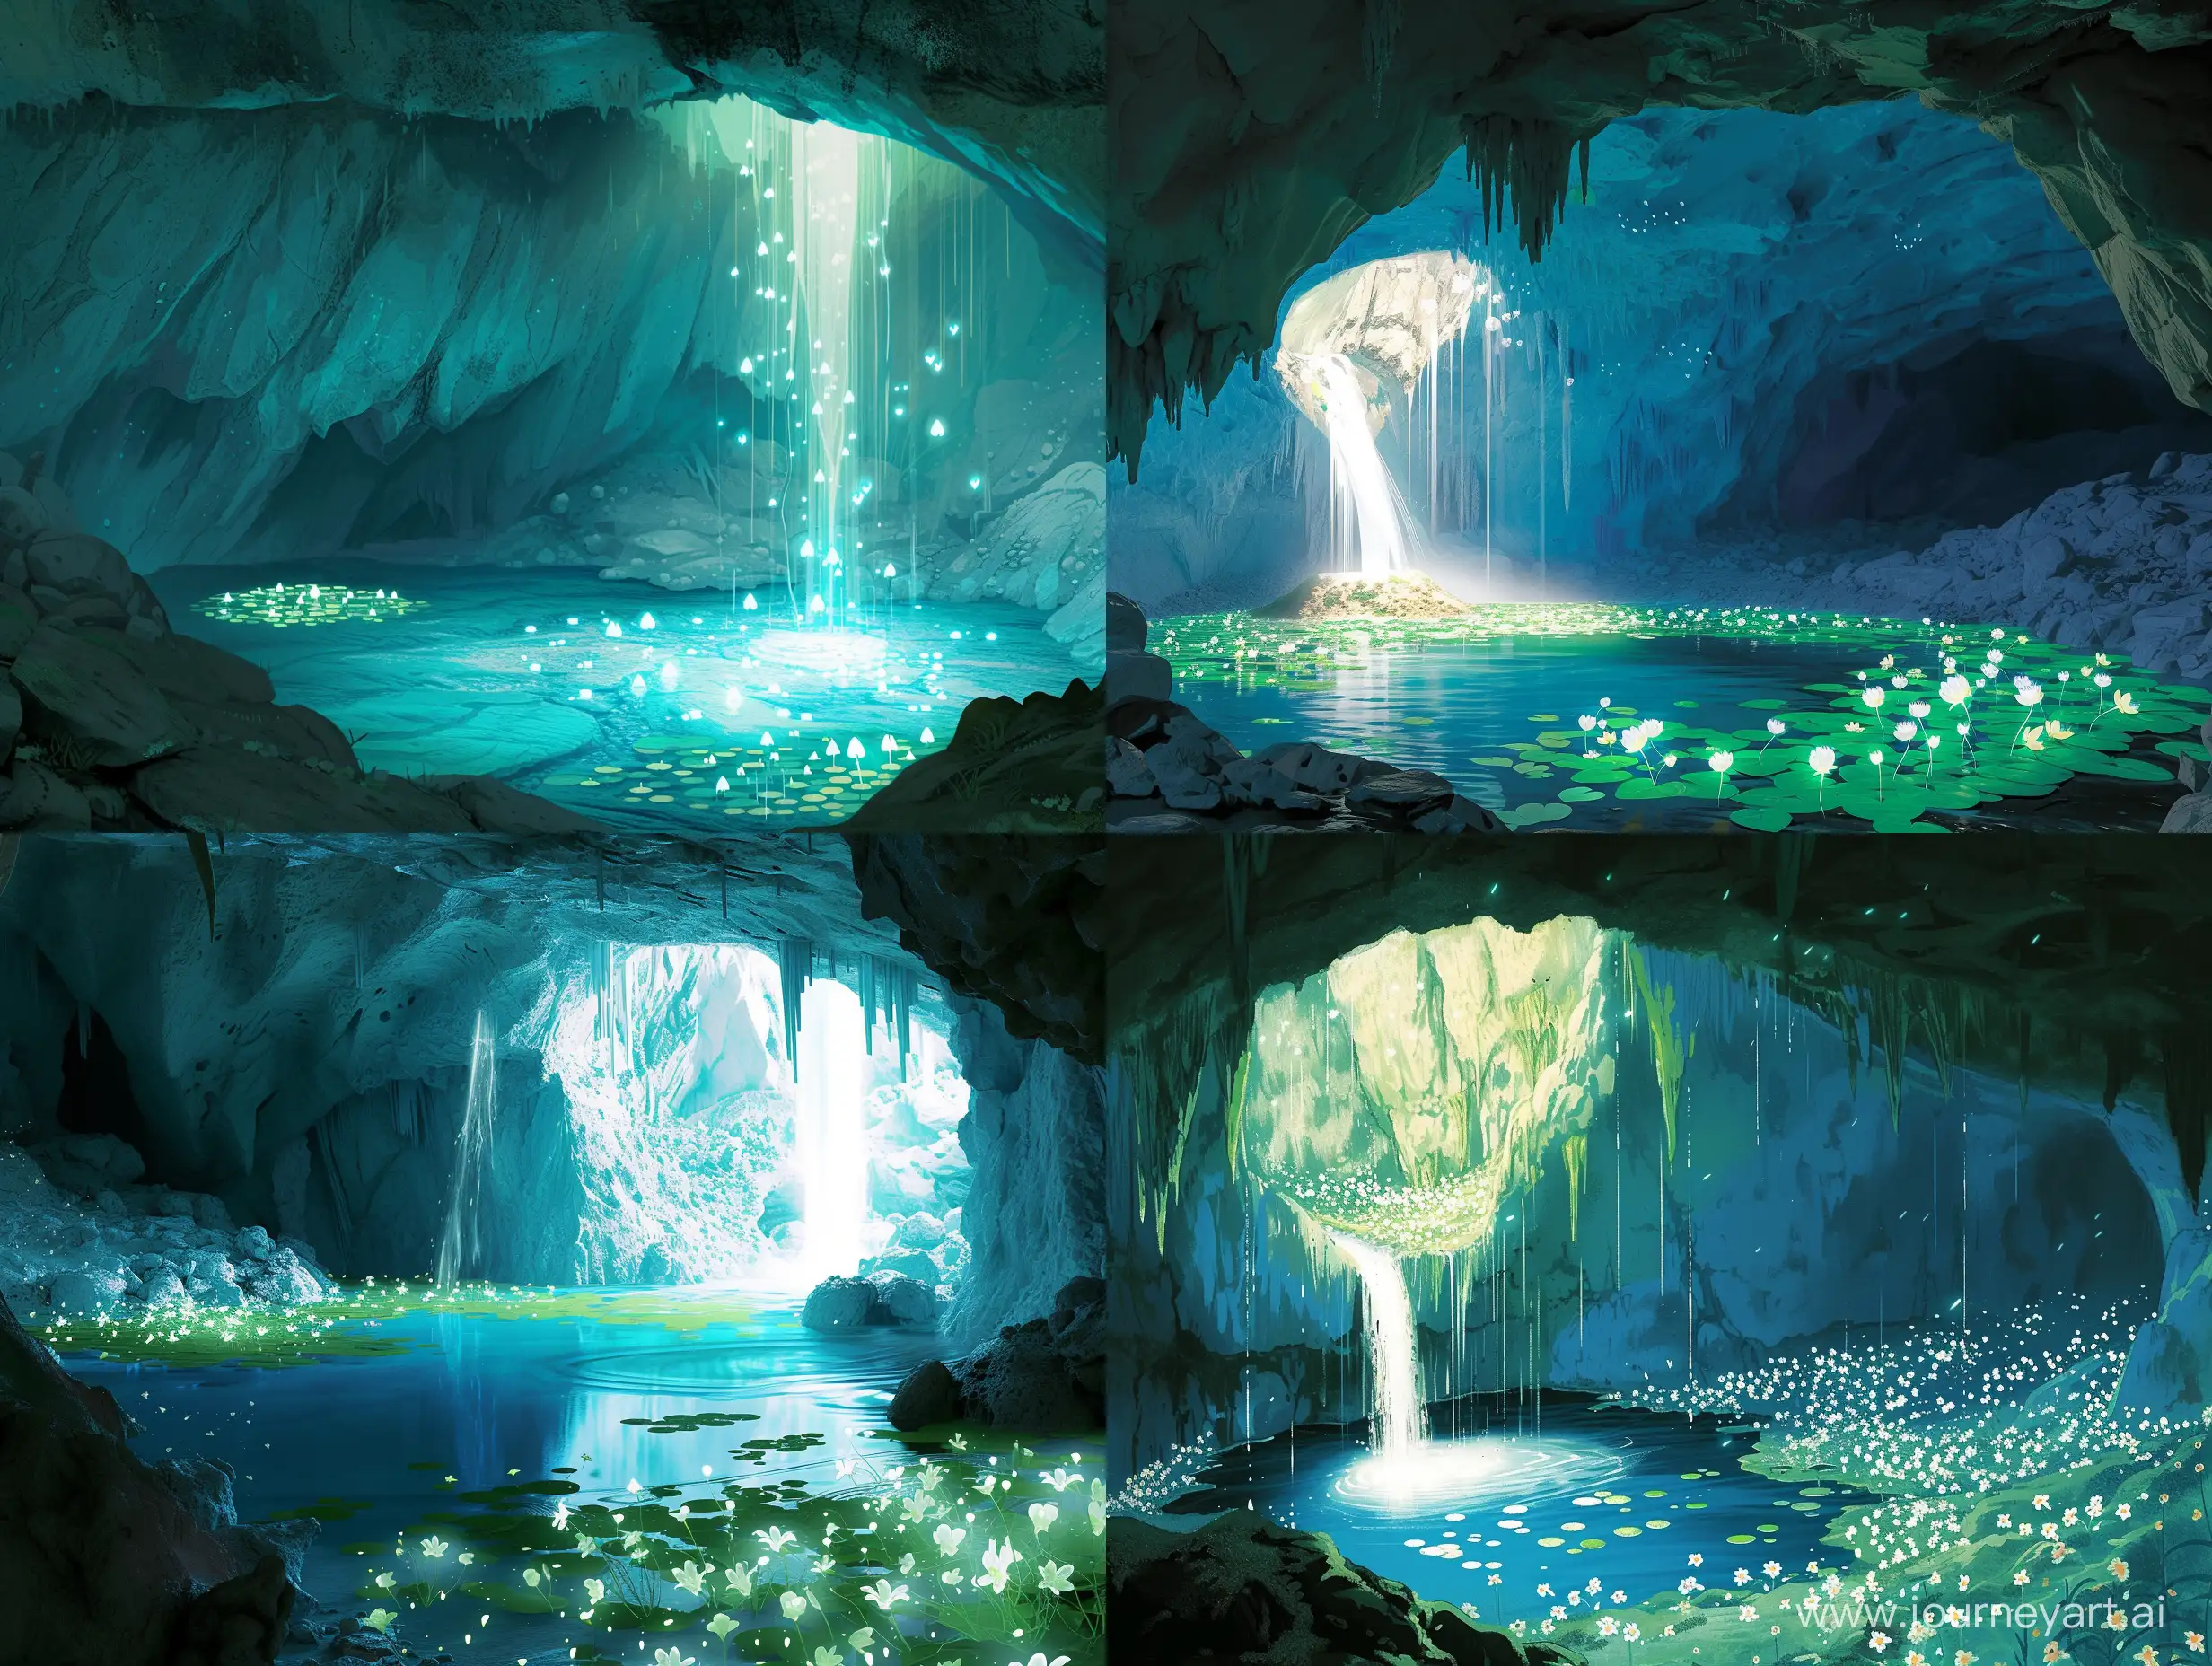 a blue-green-white cave, with a small lake and a waterfall from the cave wall, the lake is surrounded by luminous lilies of the valley, in the style of an old illustration